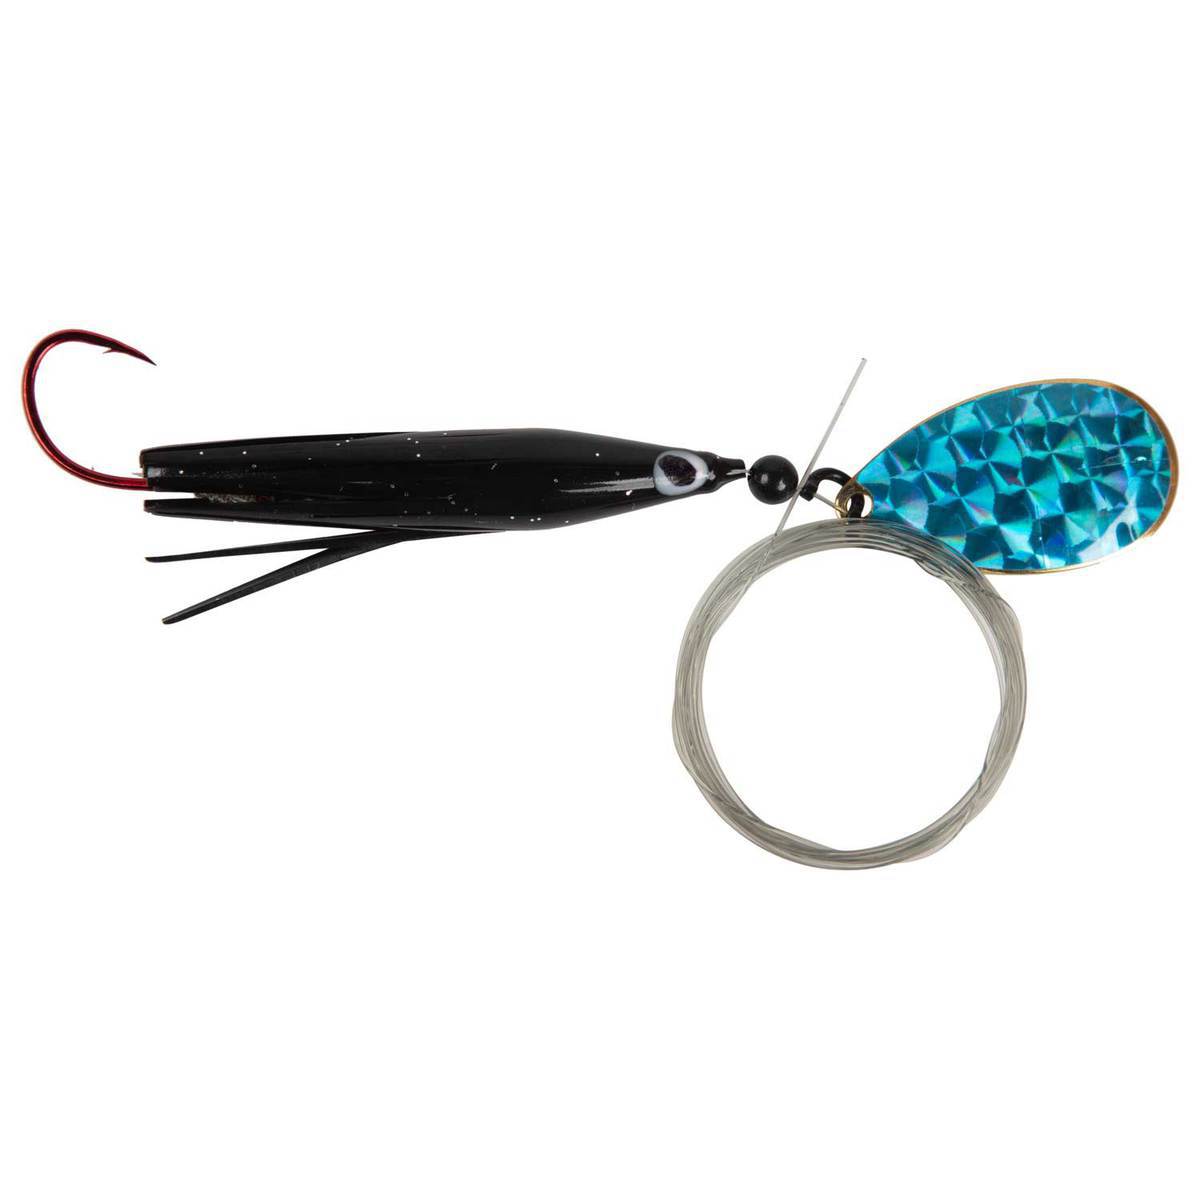 Verified Lure Fishing For Bass Coupon Code, Discount Code